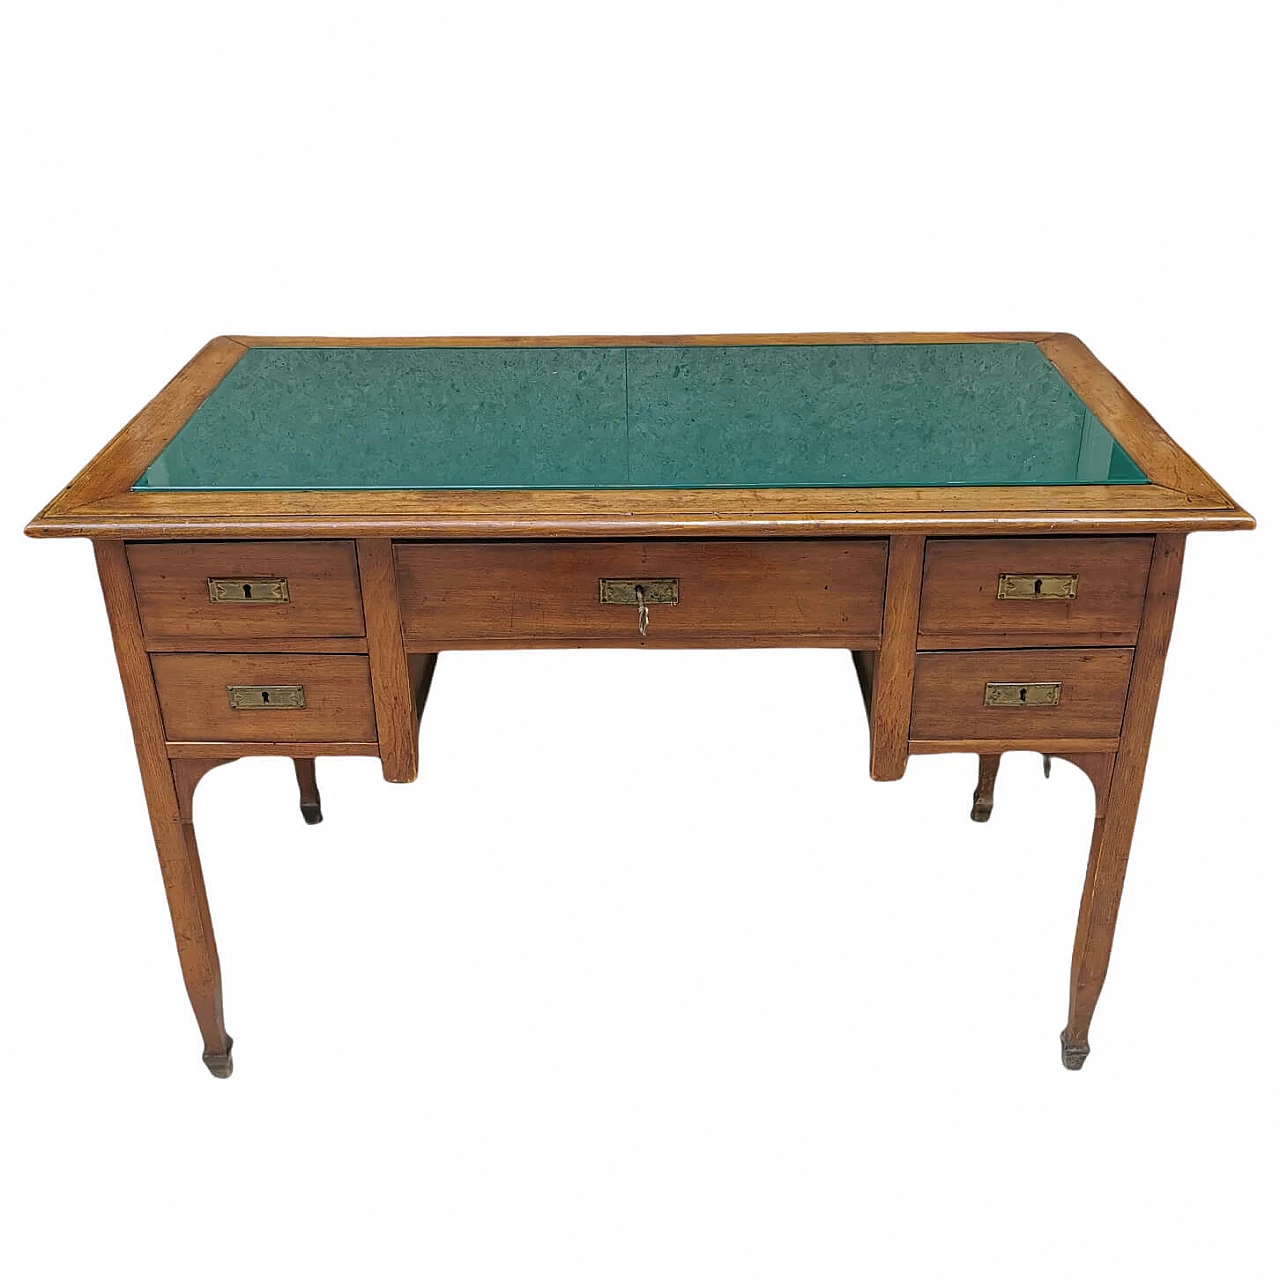 Liberty writing desk in solid wood with glass top, early 20th century 1275276